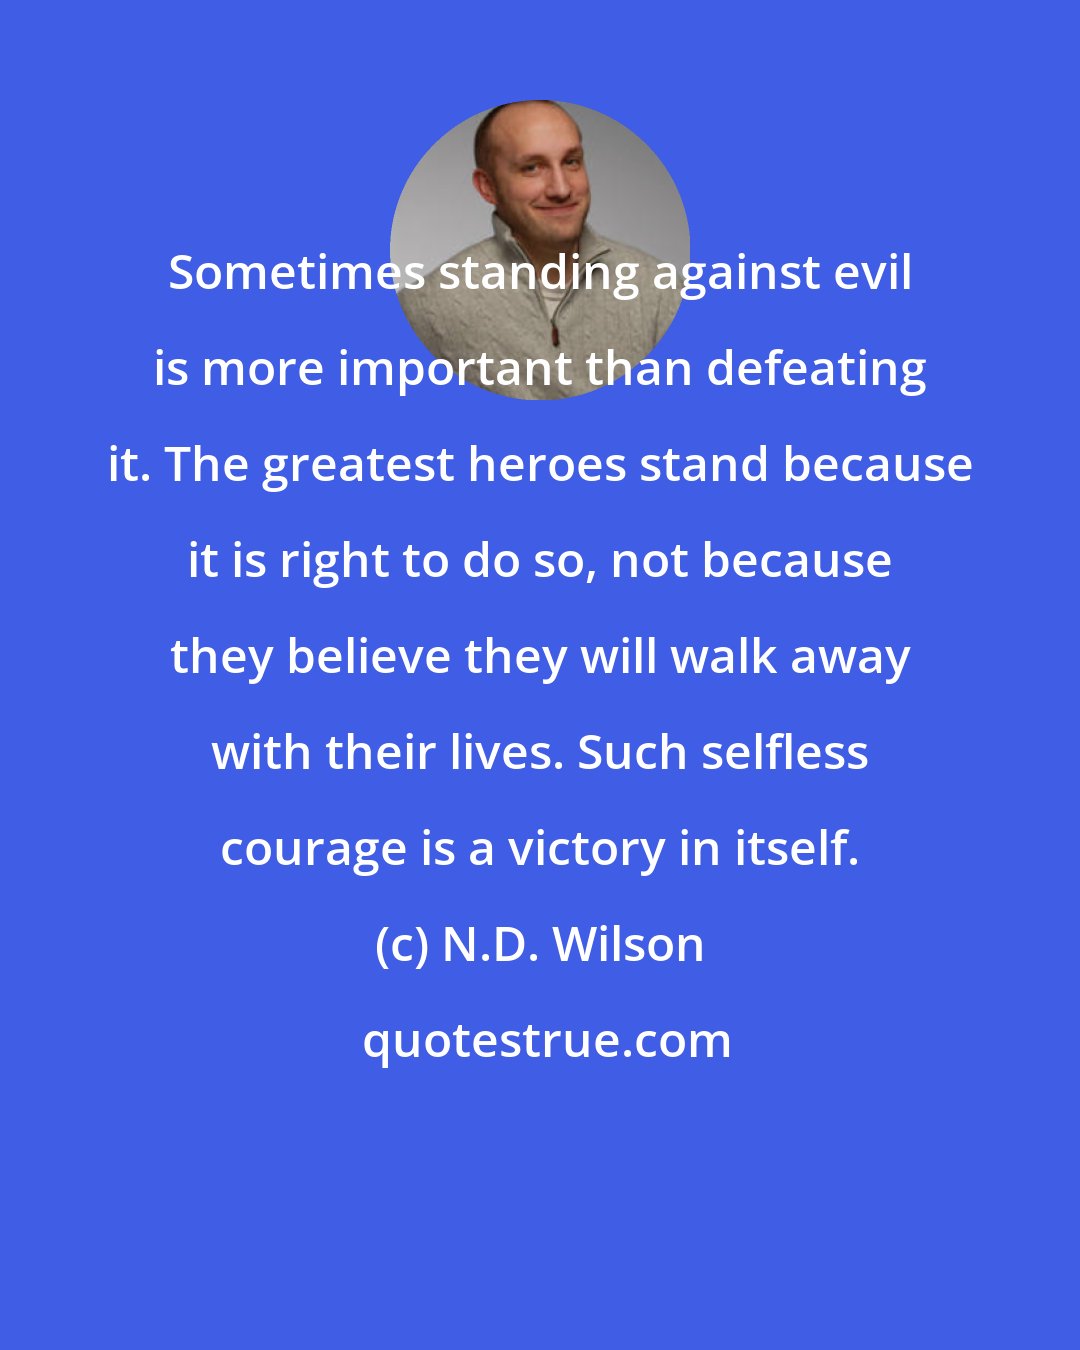 N.D. Wilson: Sometimes standing against evil is more important than defeating it. The greatest heroes stand because it is right to do so, not because they believe they will walk away with their lives. Such selfless courage is a victory in itself.